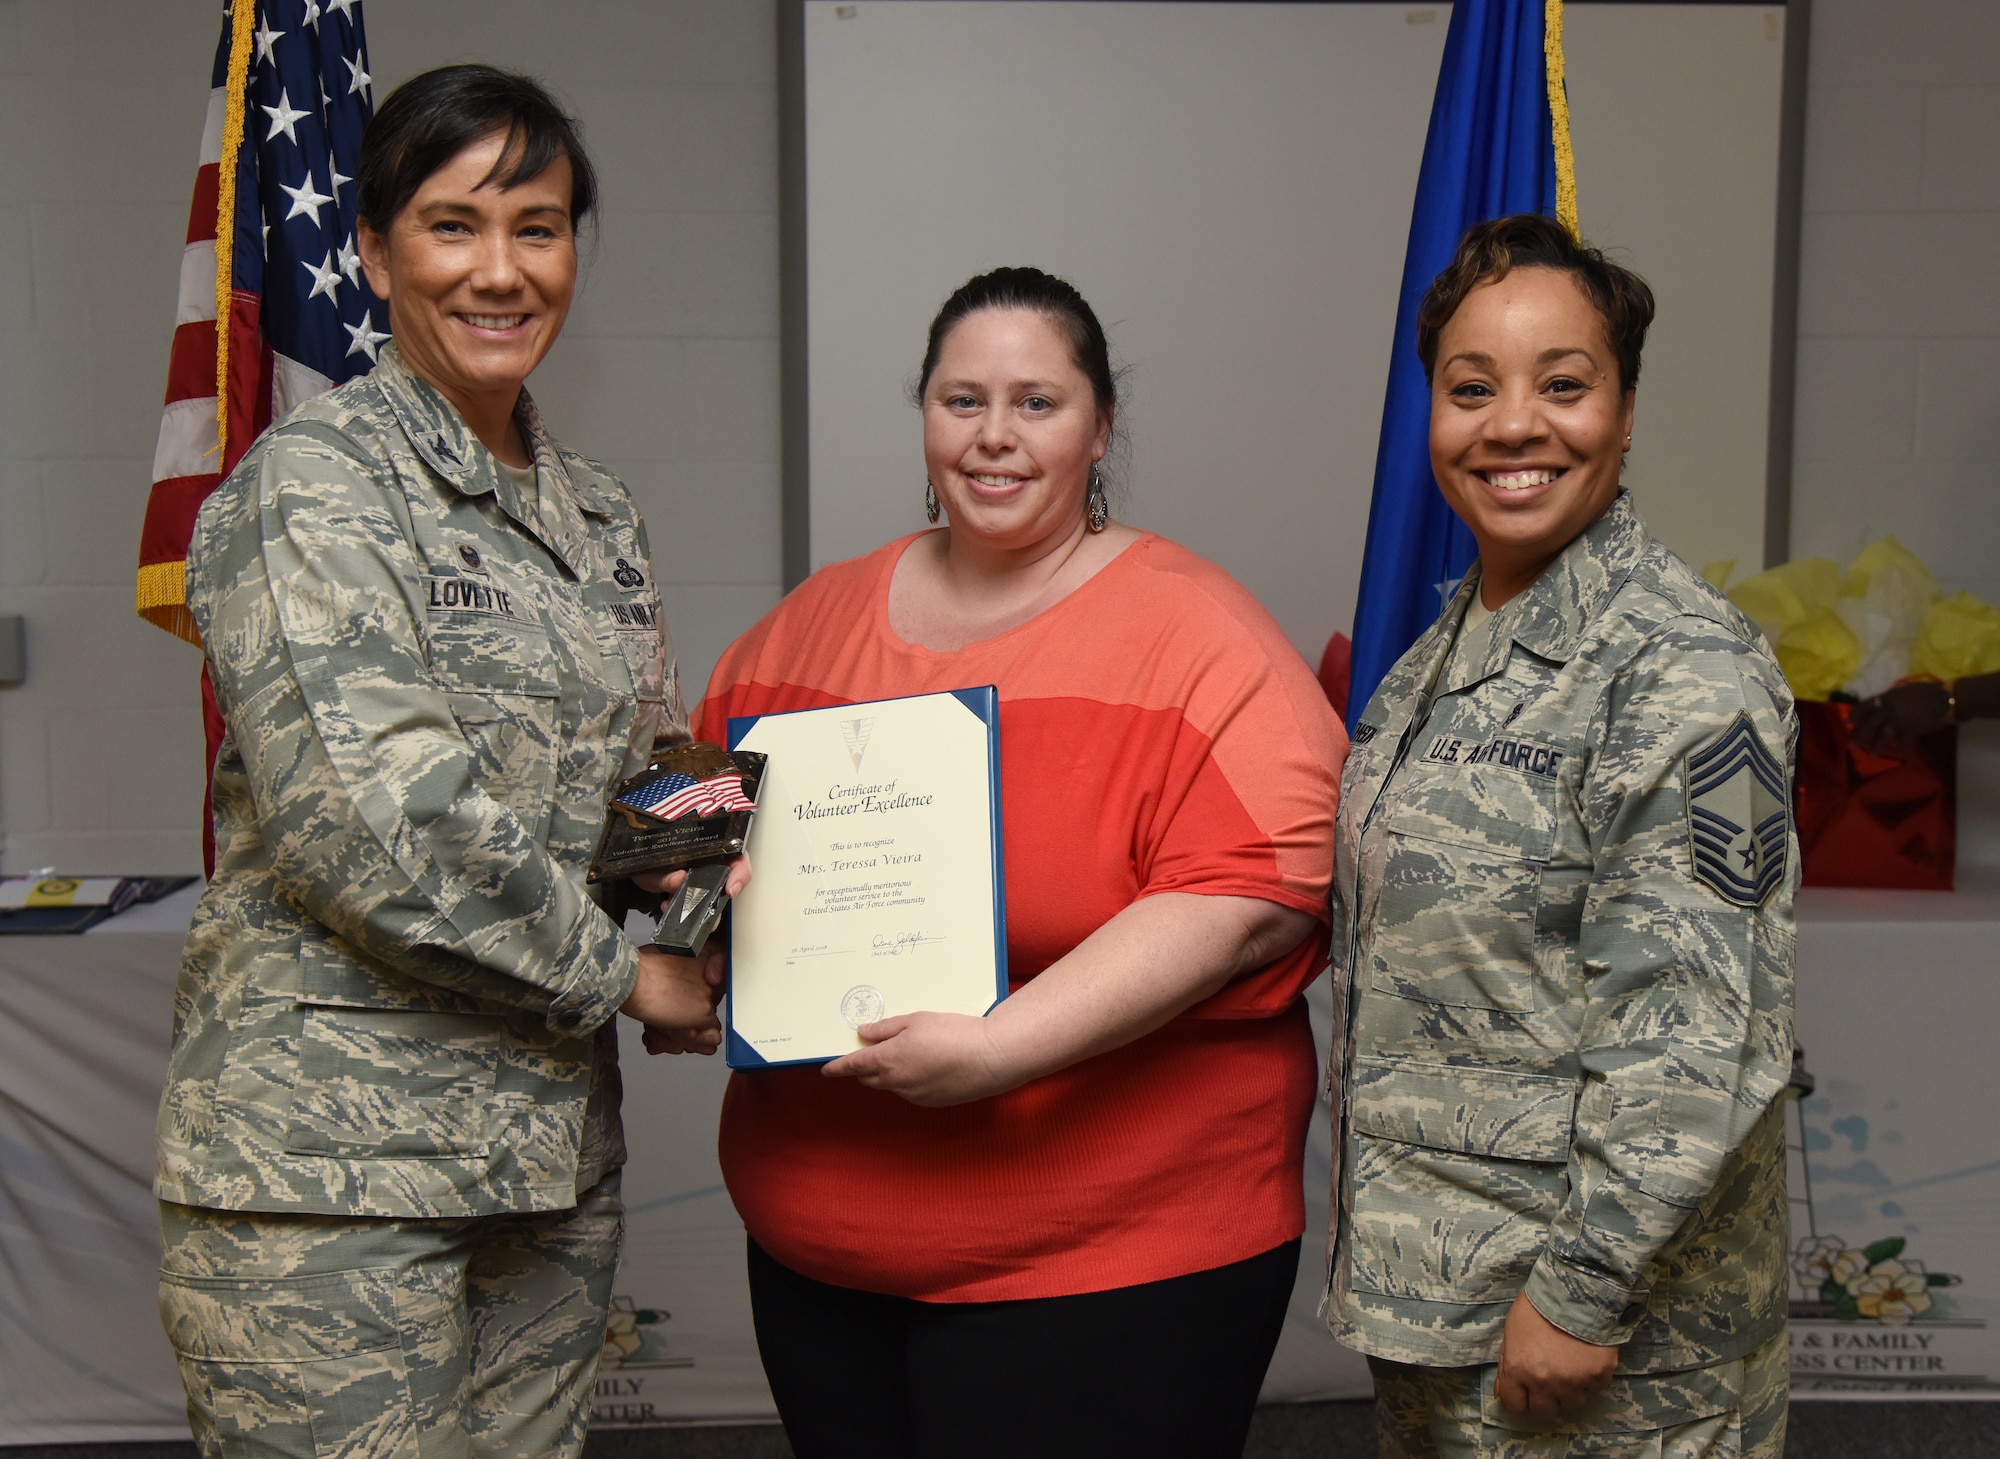 U.S. Air Force Col. Debra Lovette, 81st Training Wing commander, and Chief Master Sgt. Tanya Johnson, 81st Diagnostic and Therapeutics Squadron superintendent, presents Teressa Vieira, spouse of Jon Vieira, 81st Logistics Readiness Squadron motor vehicle operator, with a Volunteer Excellence certificate during the 2018 Volunteer Appreciation Ceremony at the Sablich Center at Keesler Air Force Base, Mississippi, April 26, 2018. The event recognized Keesler personnel, family members and retirees for their volunteer service in 2017. (U.S. Air Force photo by Kemberly Groue)